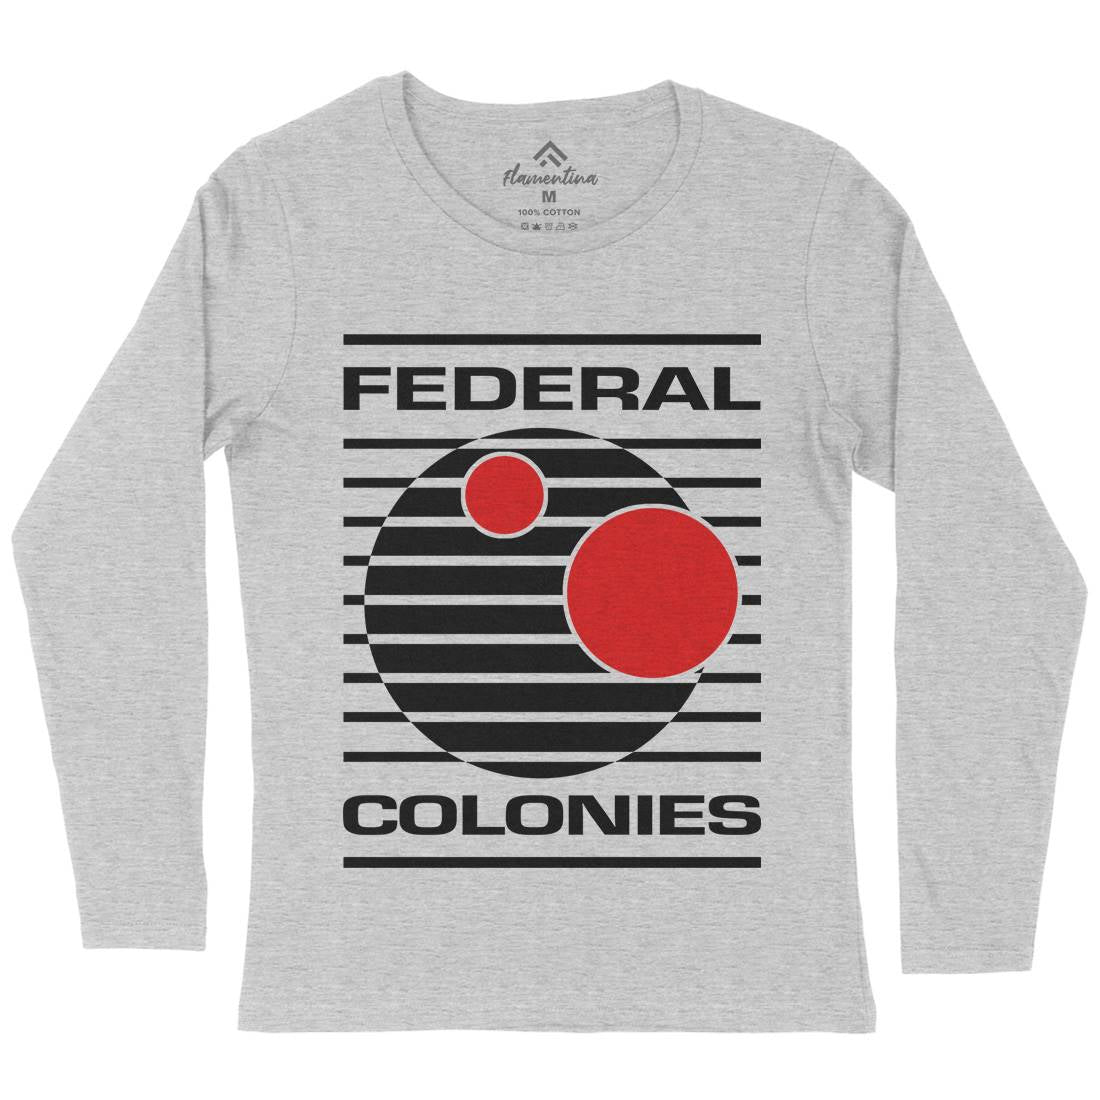 Federal Colonies Womens Long Sleeve T-Shirt Space D409